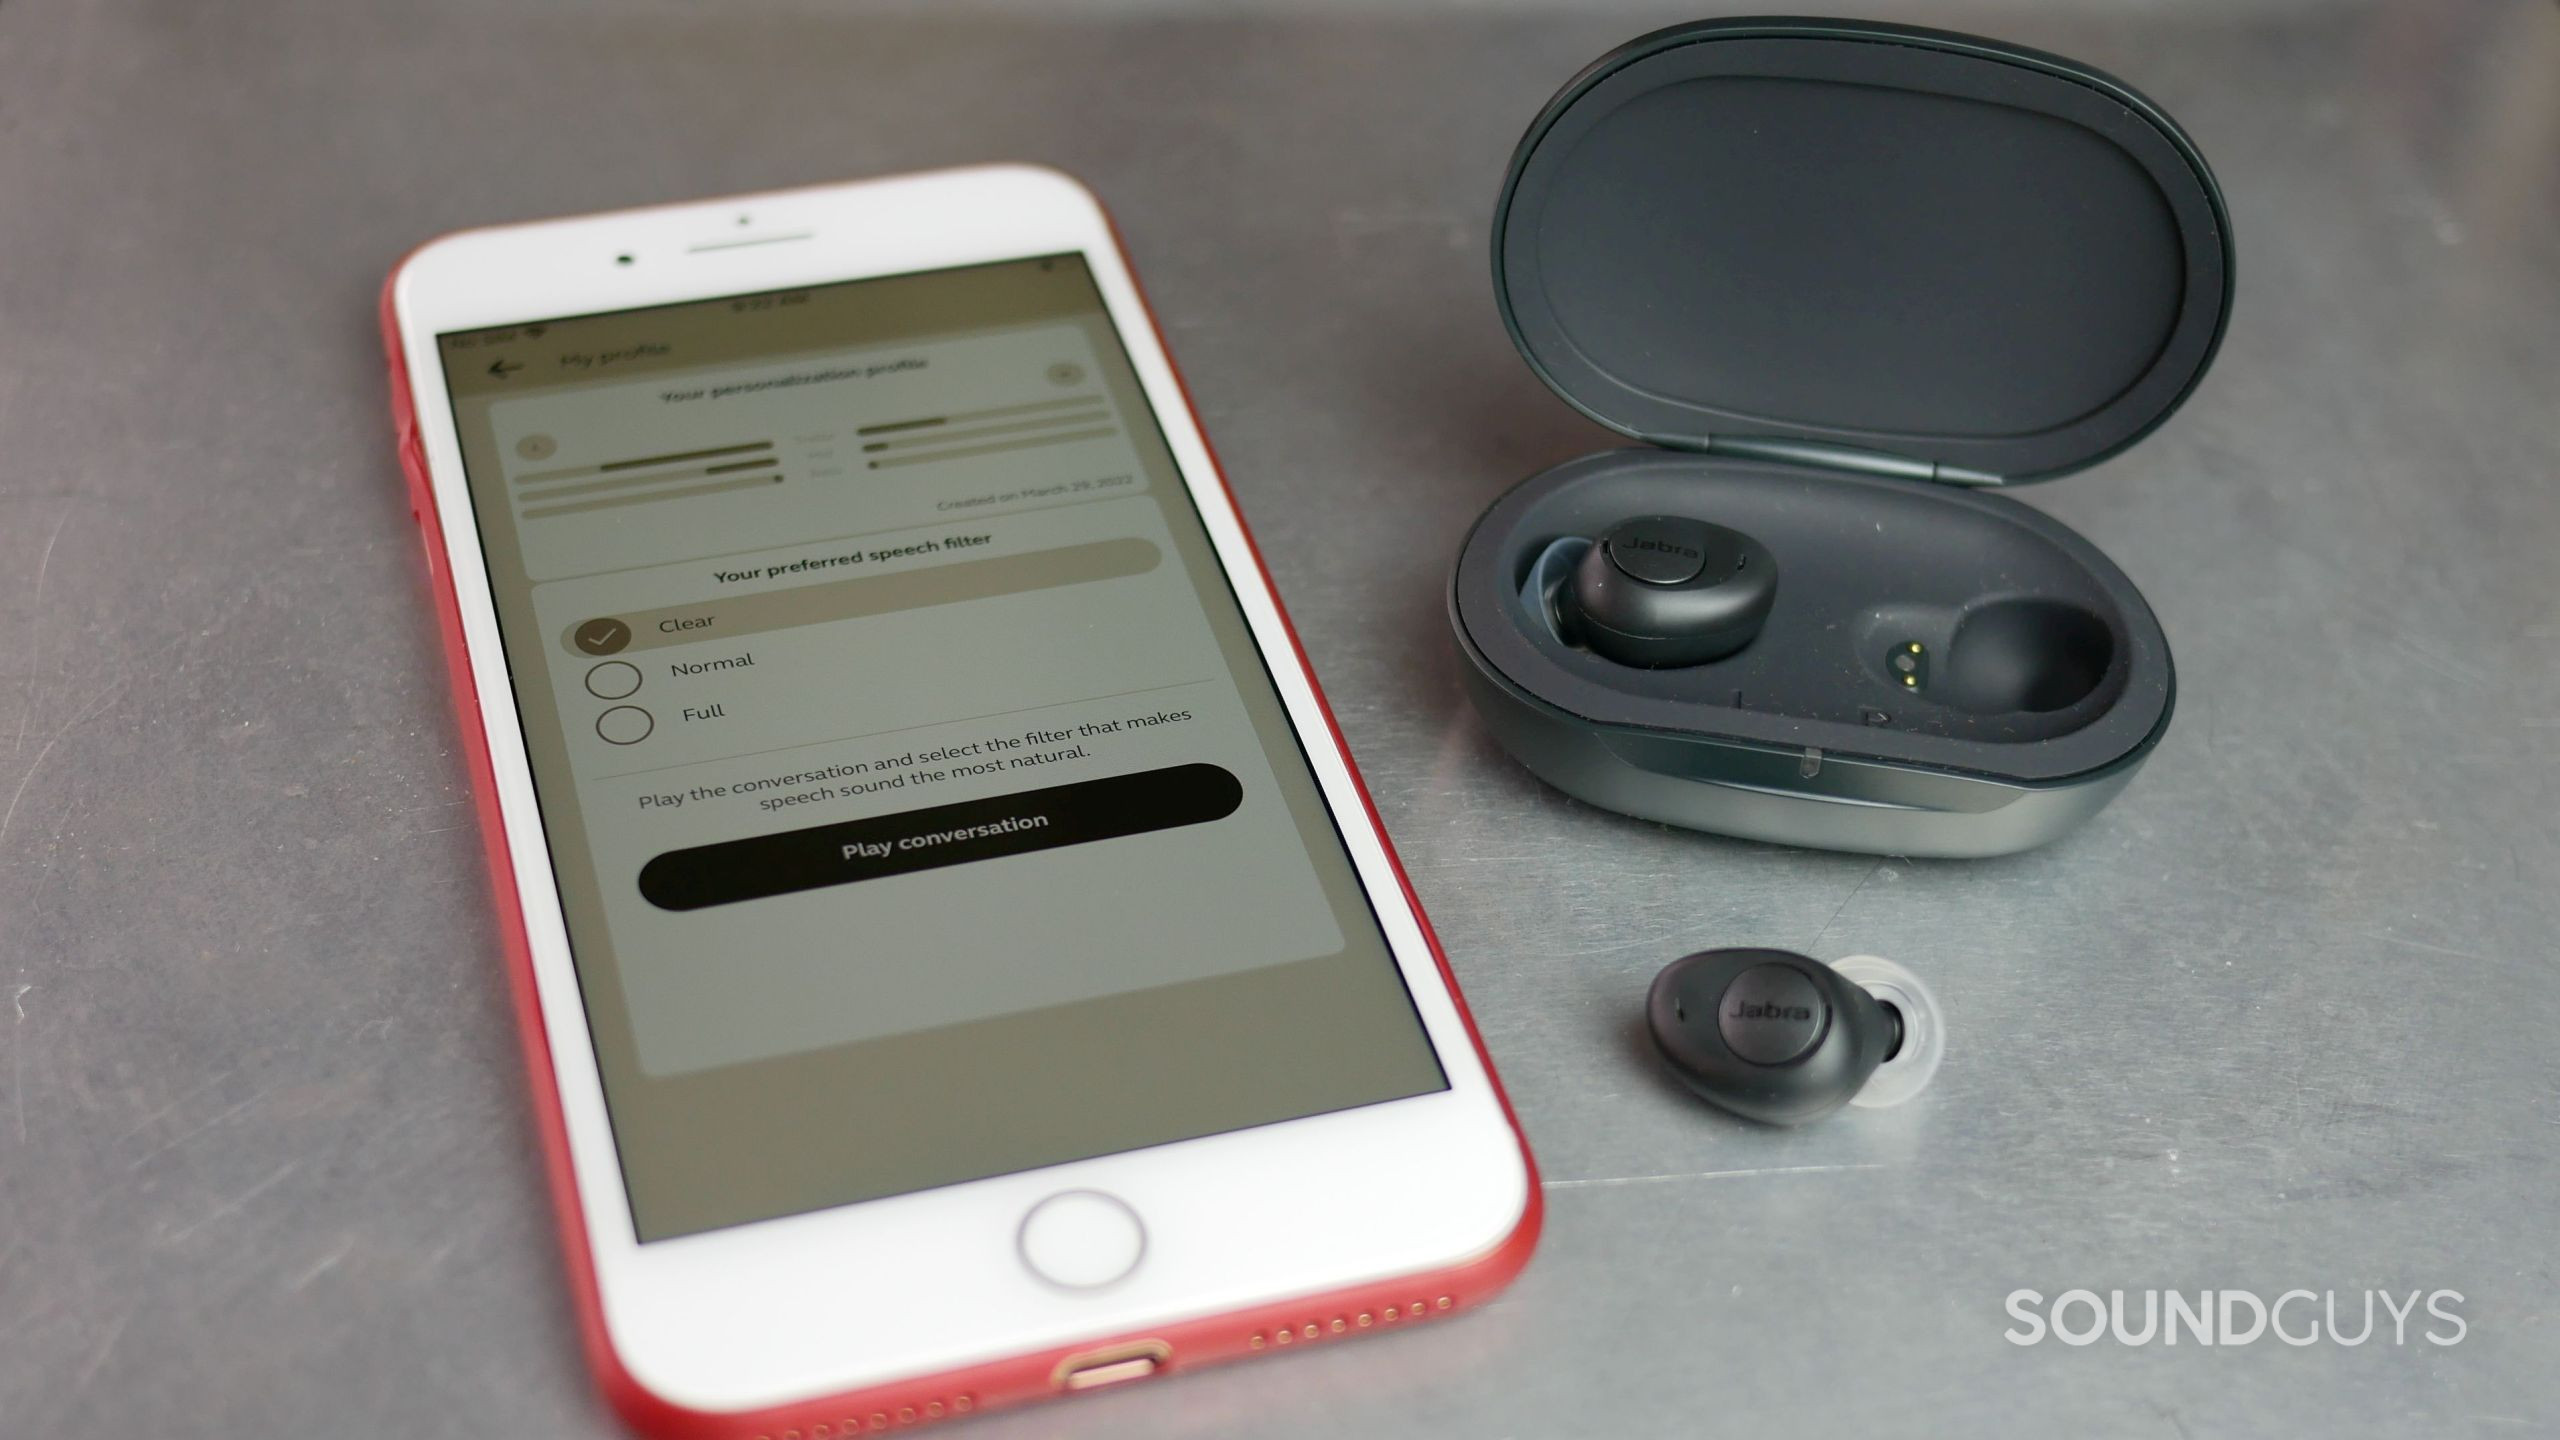 Jabra Enhance Plus earbuds and charging case with iPhone and Jabra Enhance app on personalization screen.